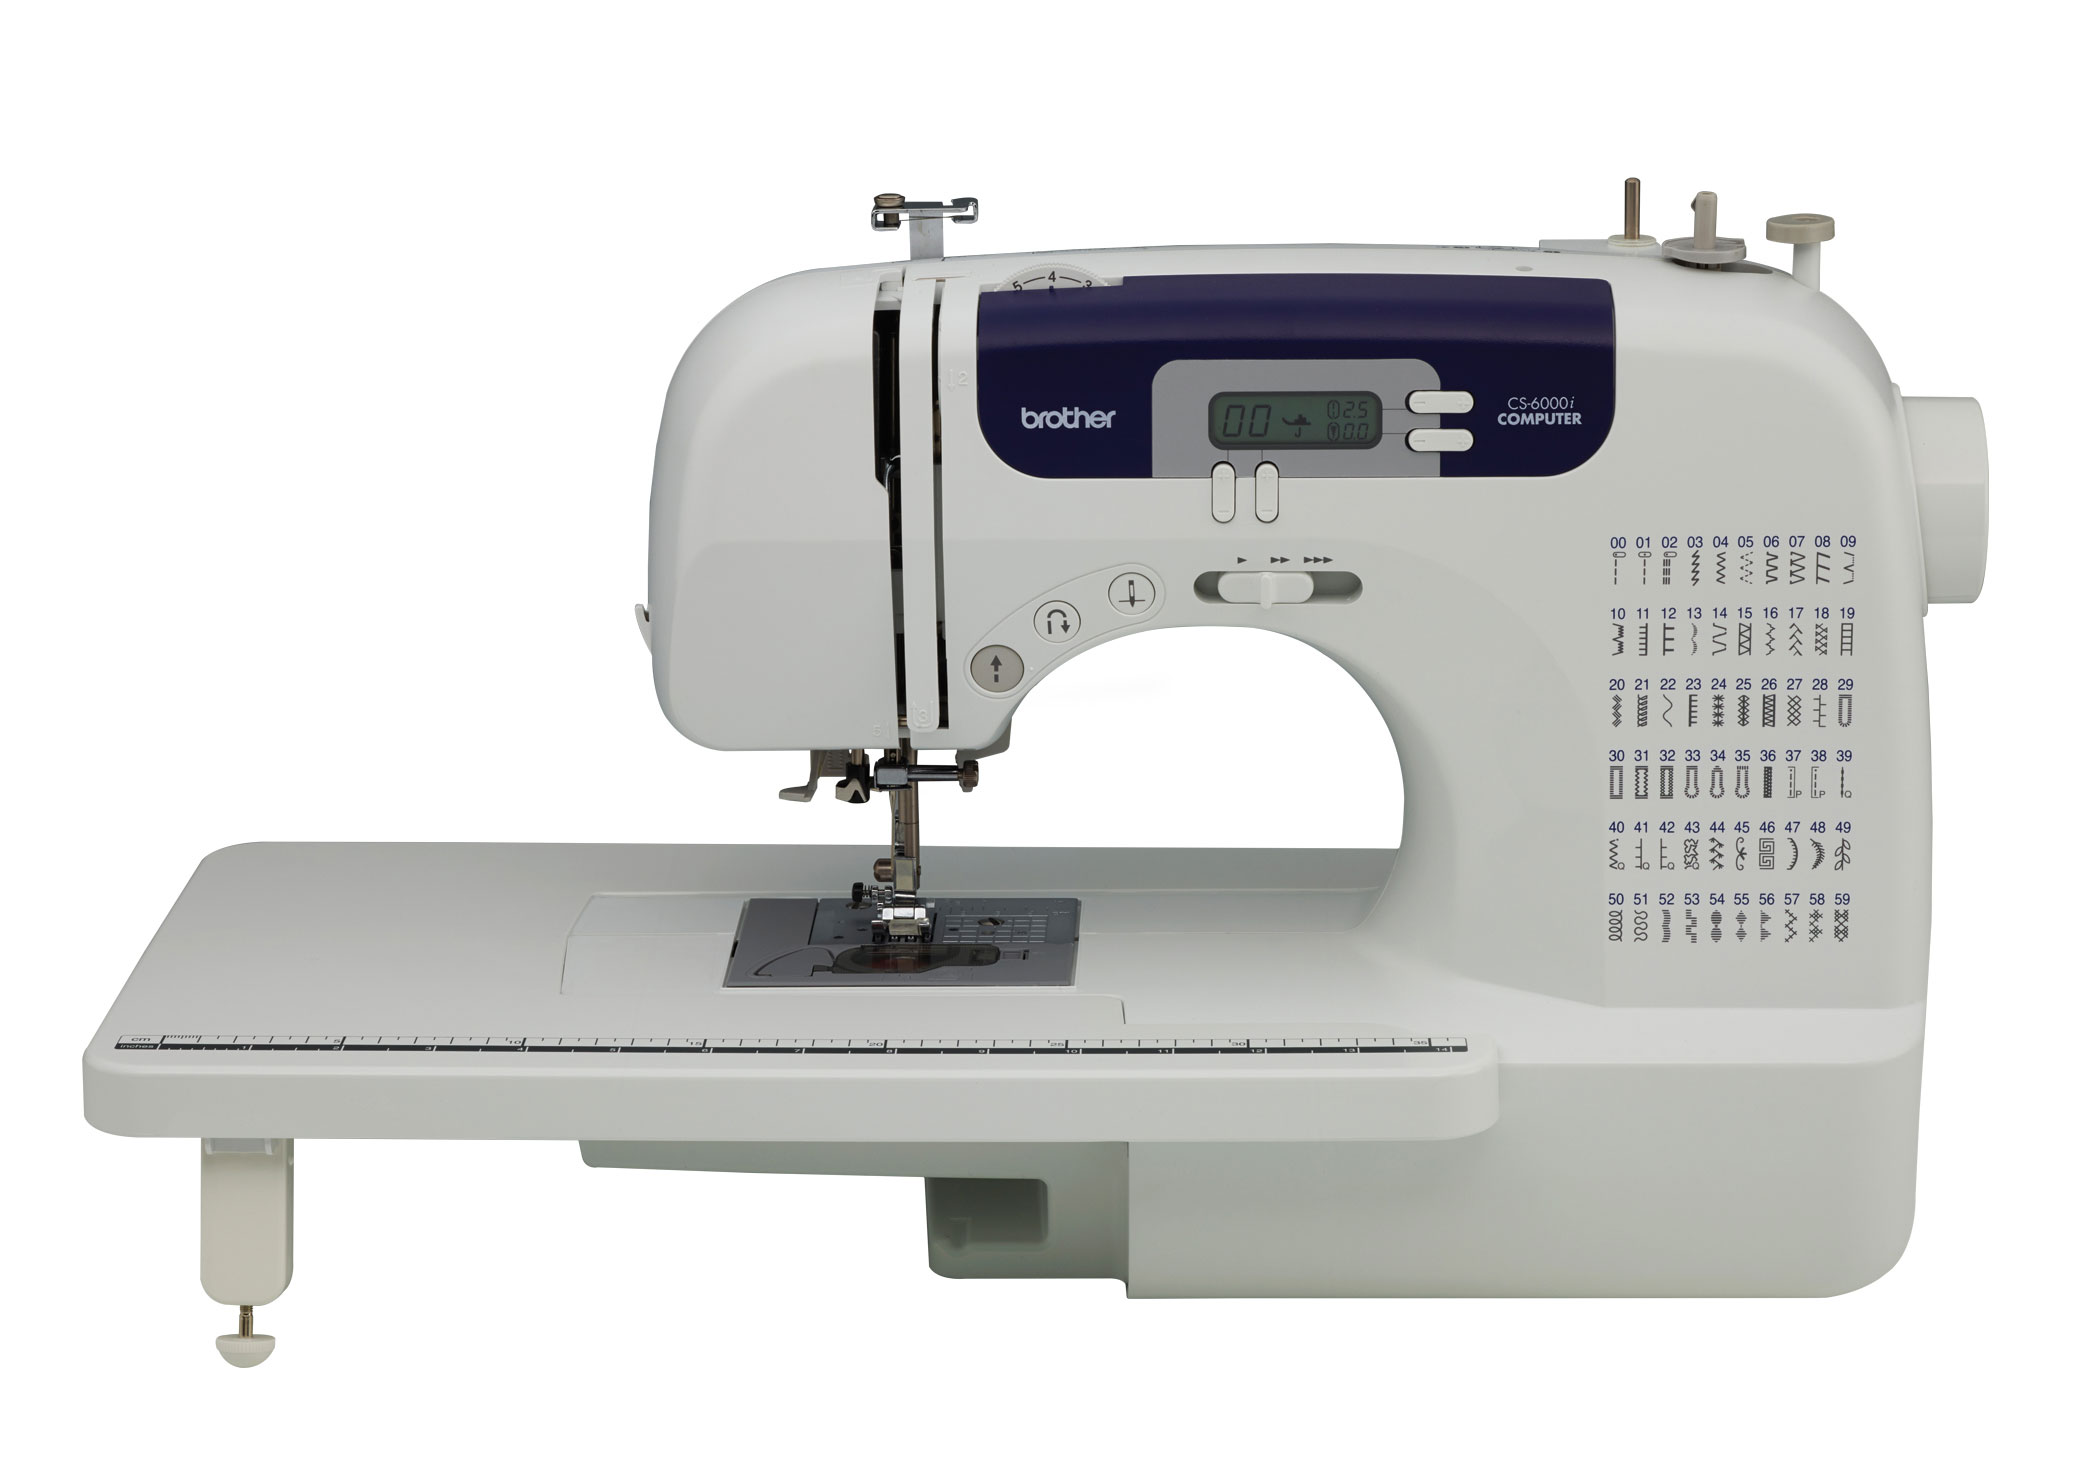 Brother CS6000i Computerized Sewing Machine with Wide Table - image 1 of 12